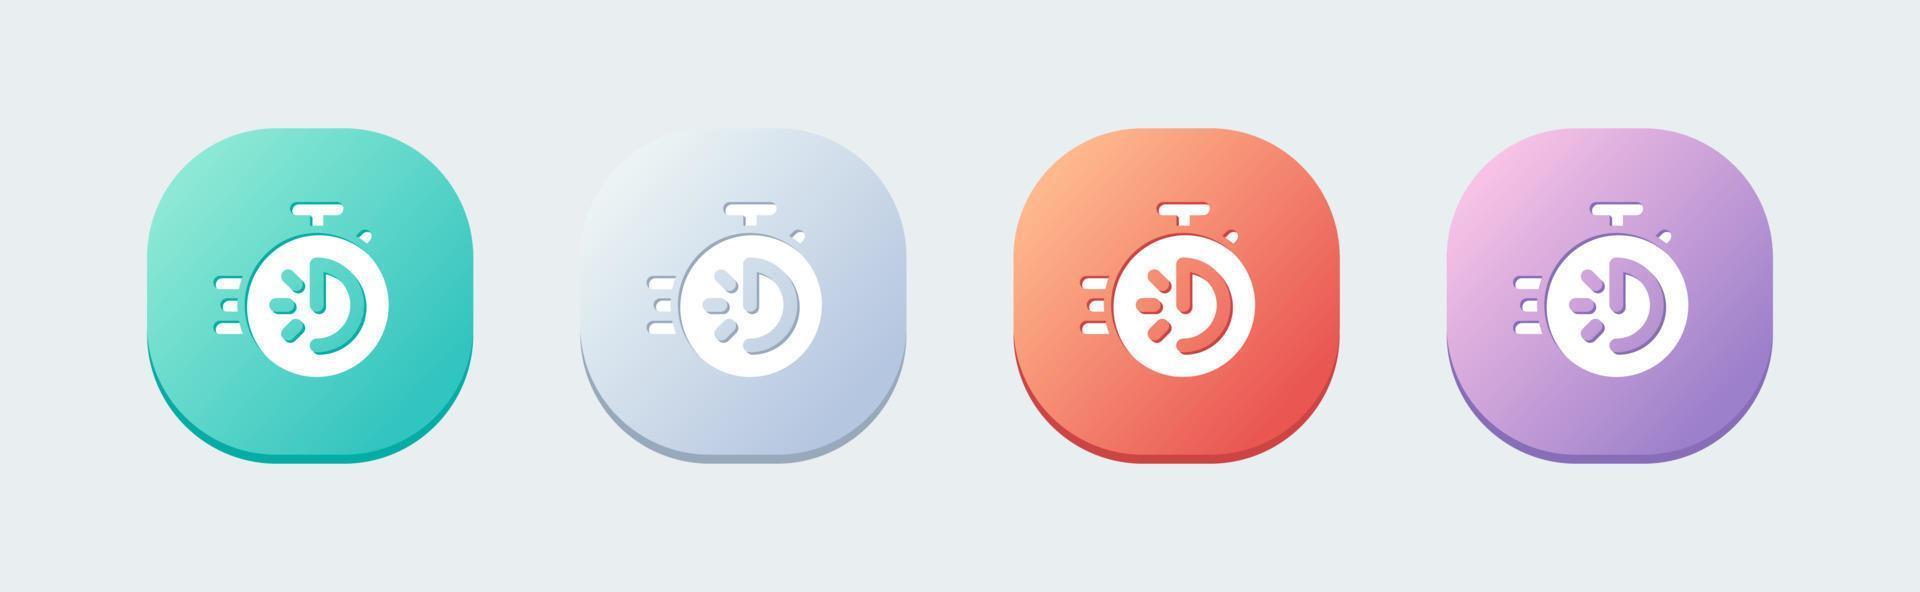 Stopwatch solid icon in flat design style. Speed timer signs vector illustration.